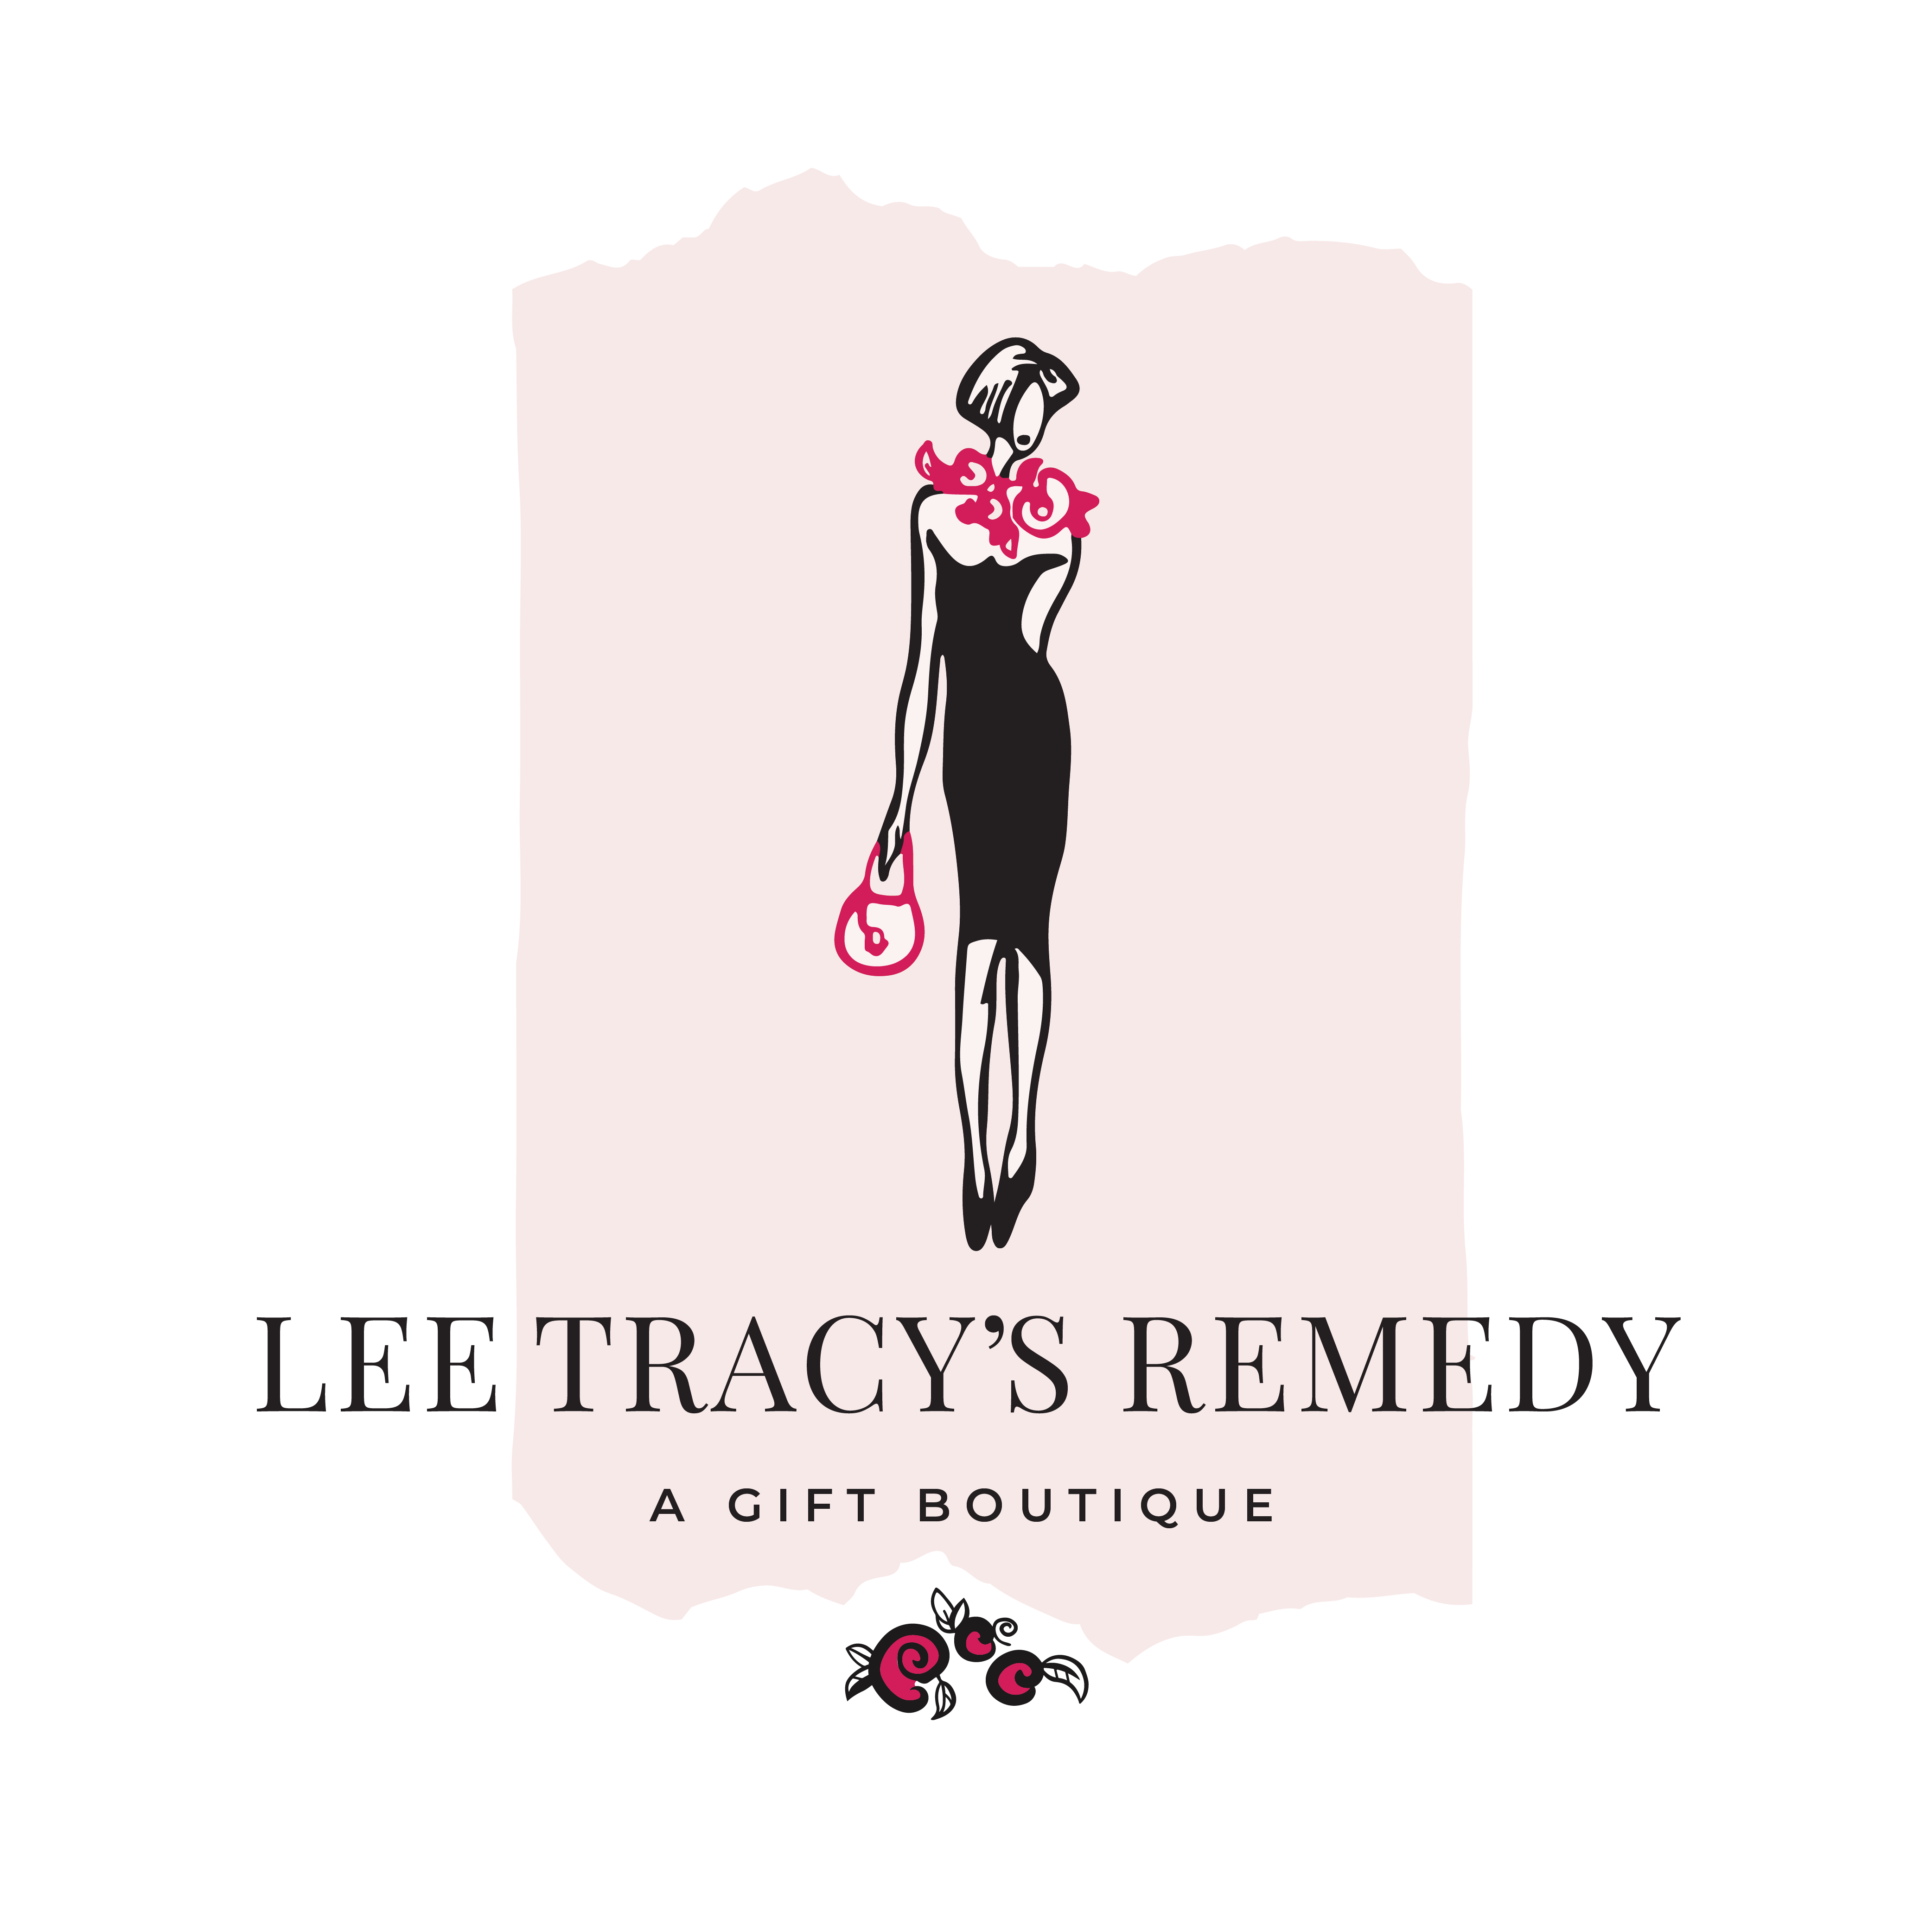 Lee Tracy's Remedy Gift Shop Logo